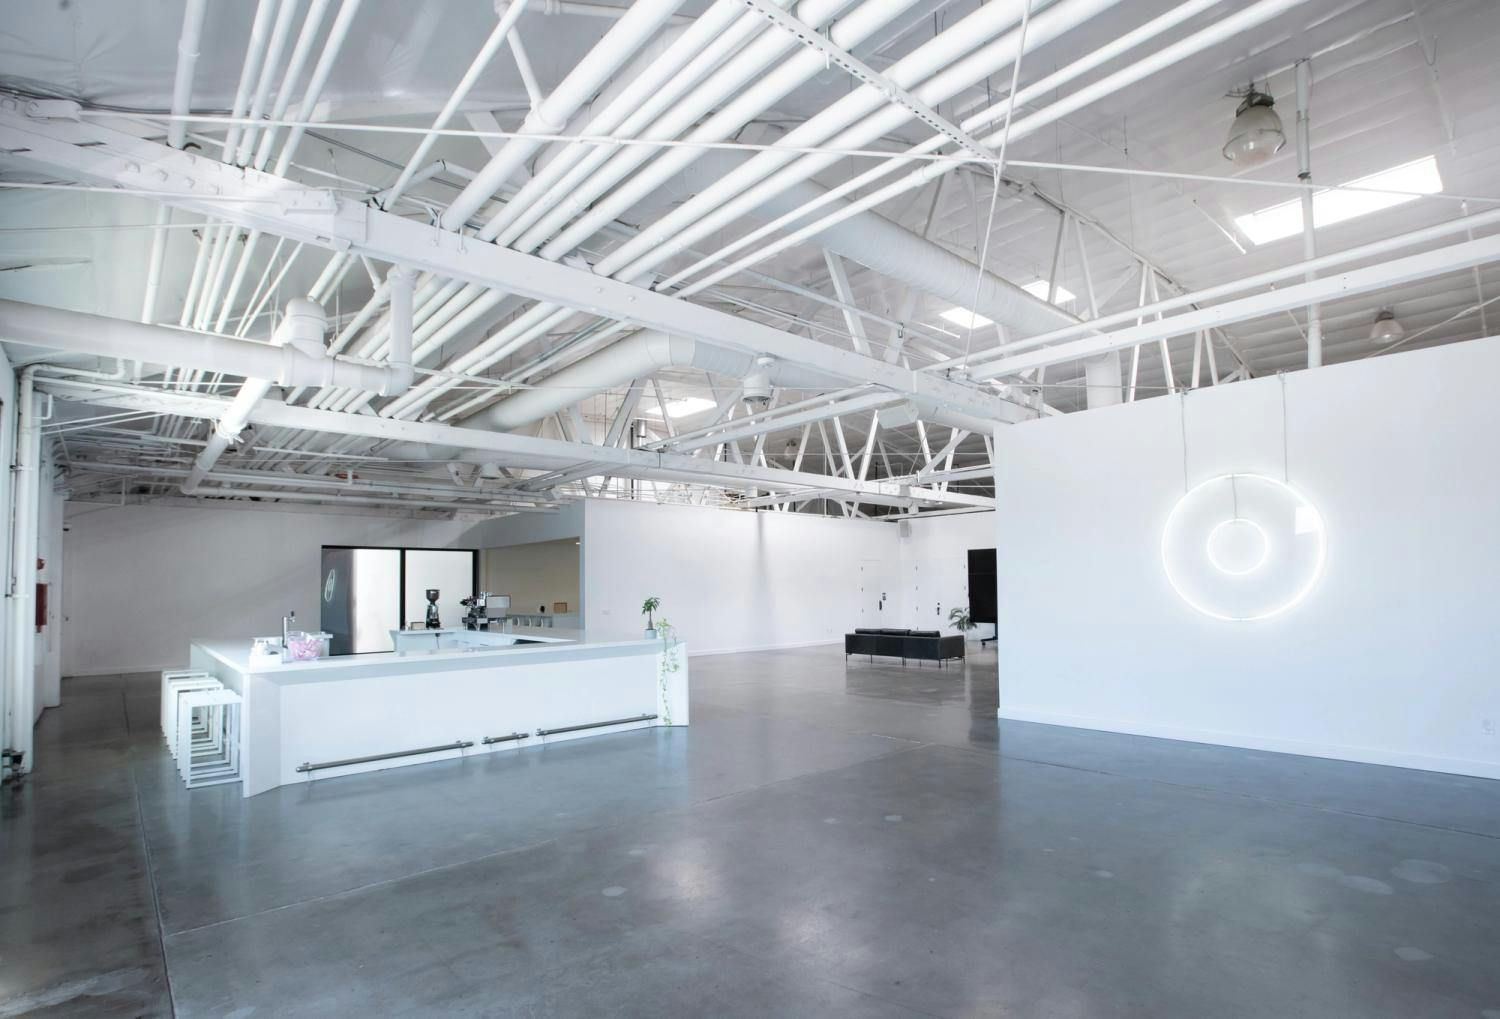 A spacious, minimalist gallery with a bright interior, exposed white beams, and a modern circular light fixture as the focal point.